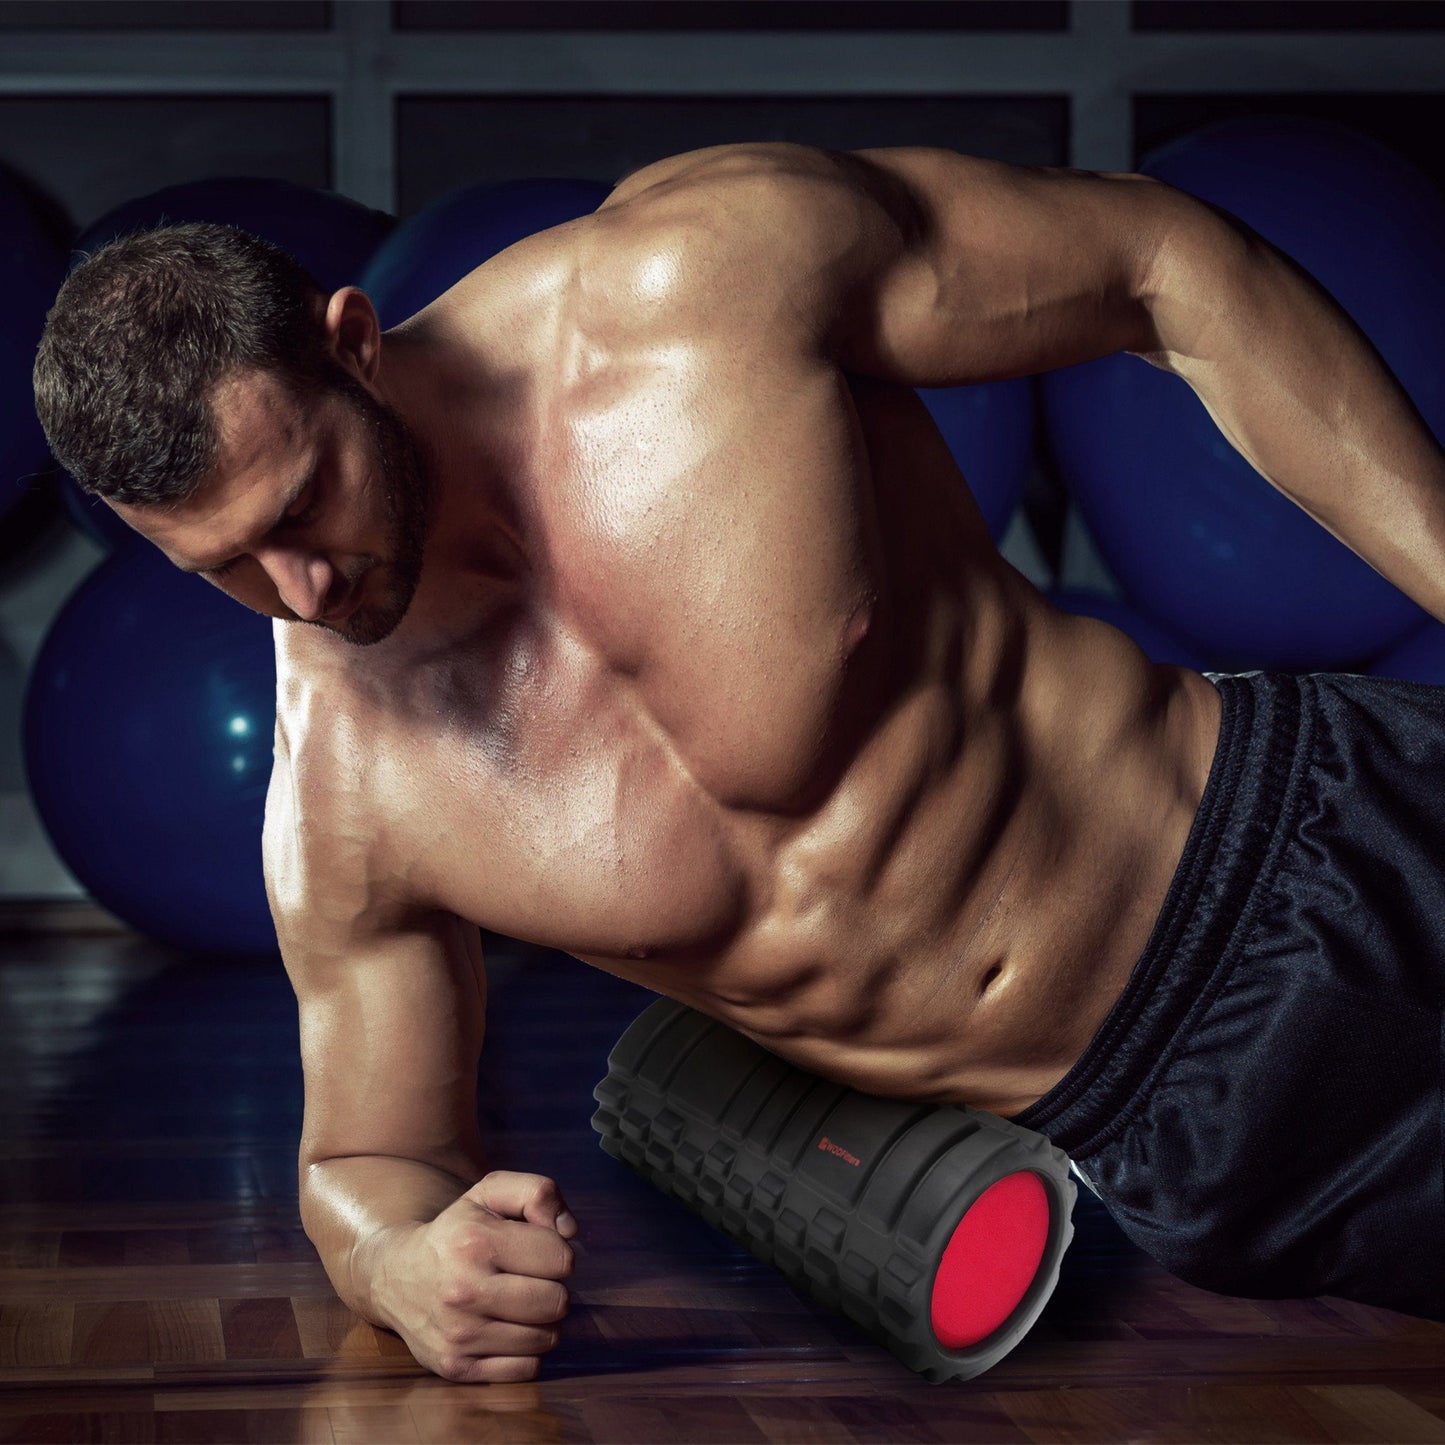 WODFitters Foam Roller for Trigger Point Massage and Recovery 